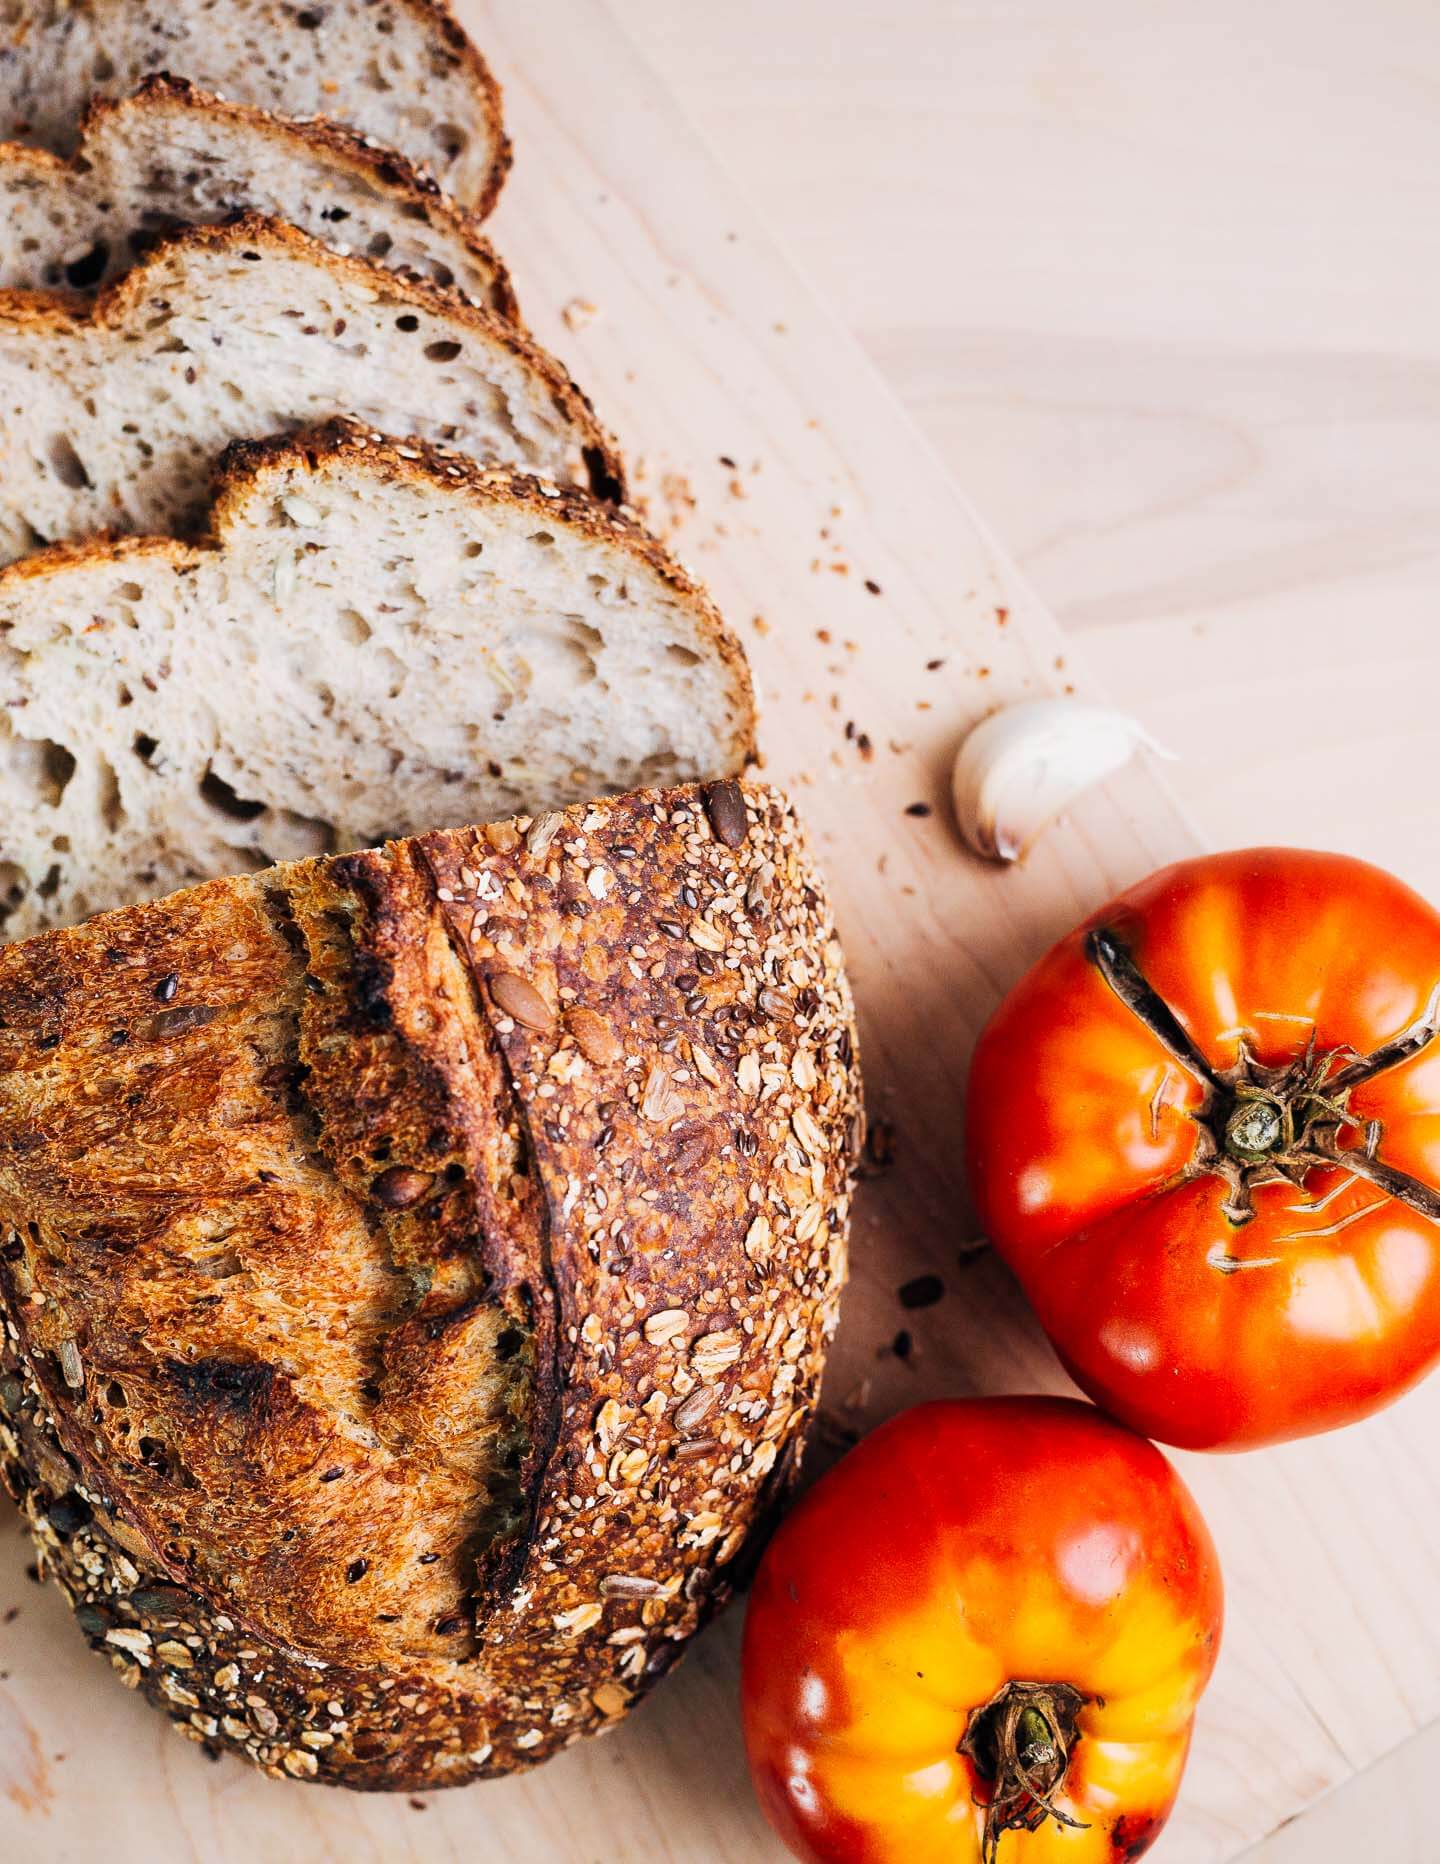 Rustic seeded sourdough and garden tomatoes